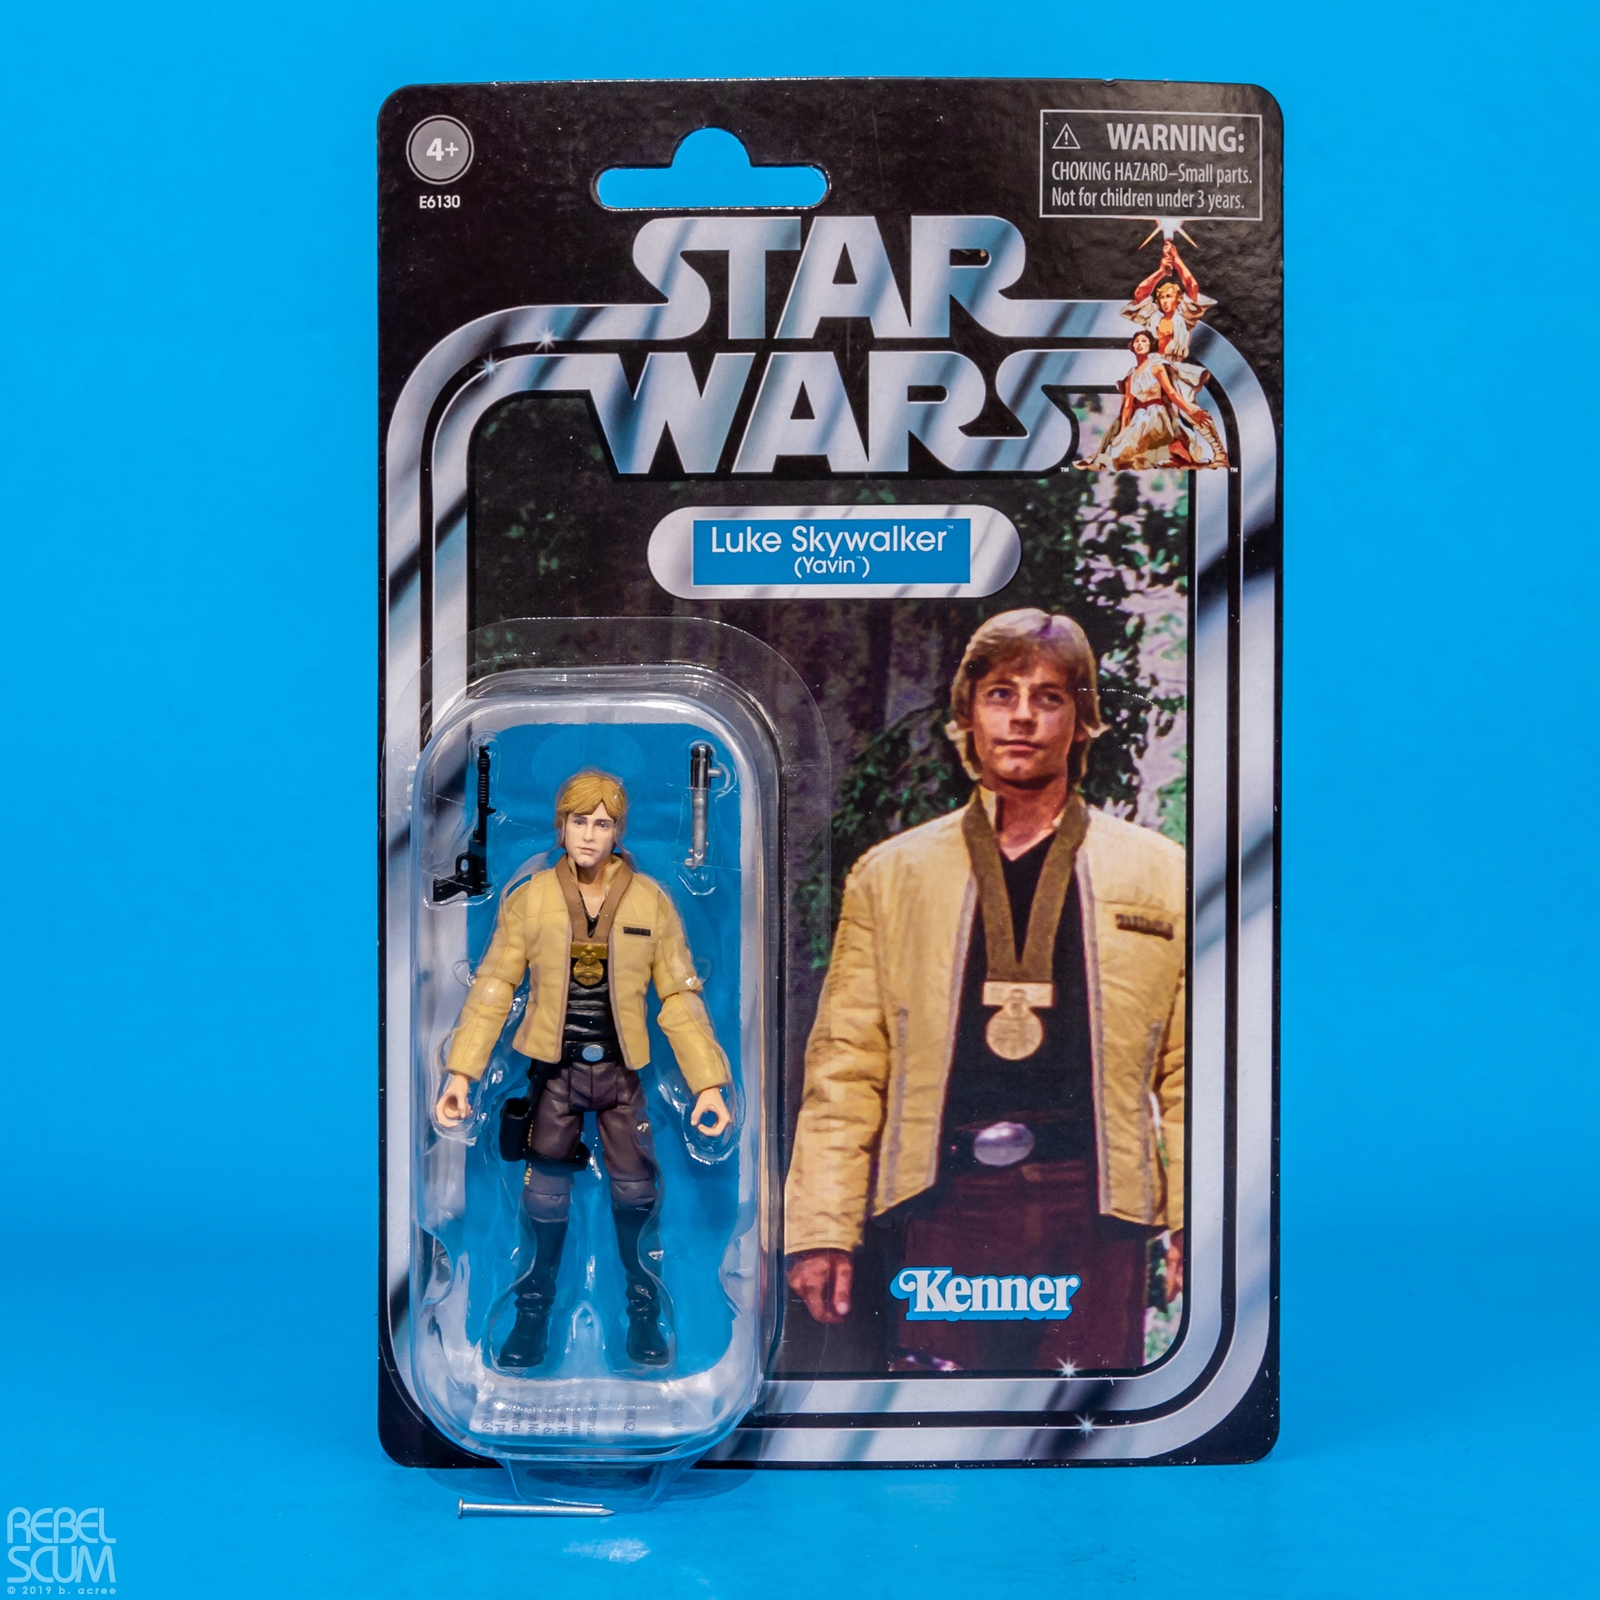 Star Wars Vintage Collection VC151 Luke Skywalker Yavin Small Text Variant 